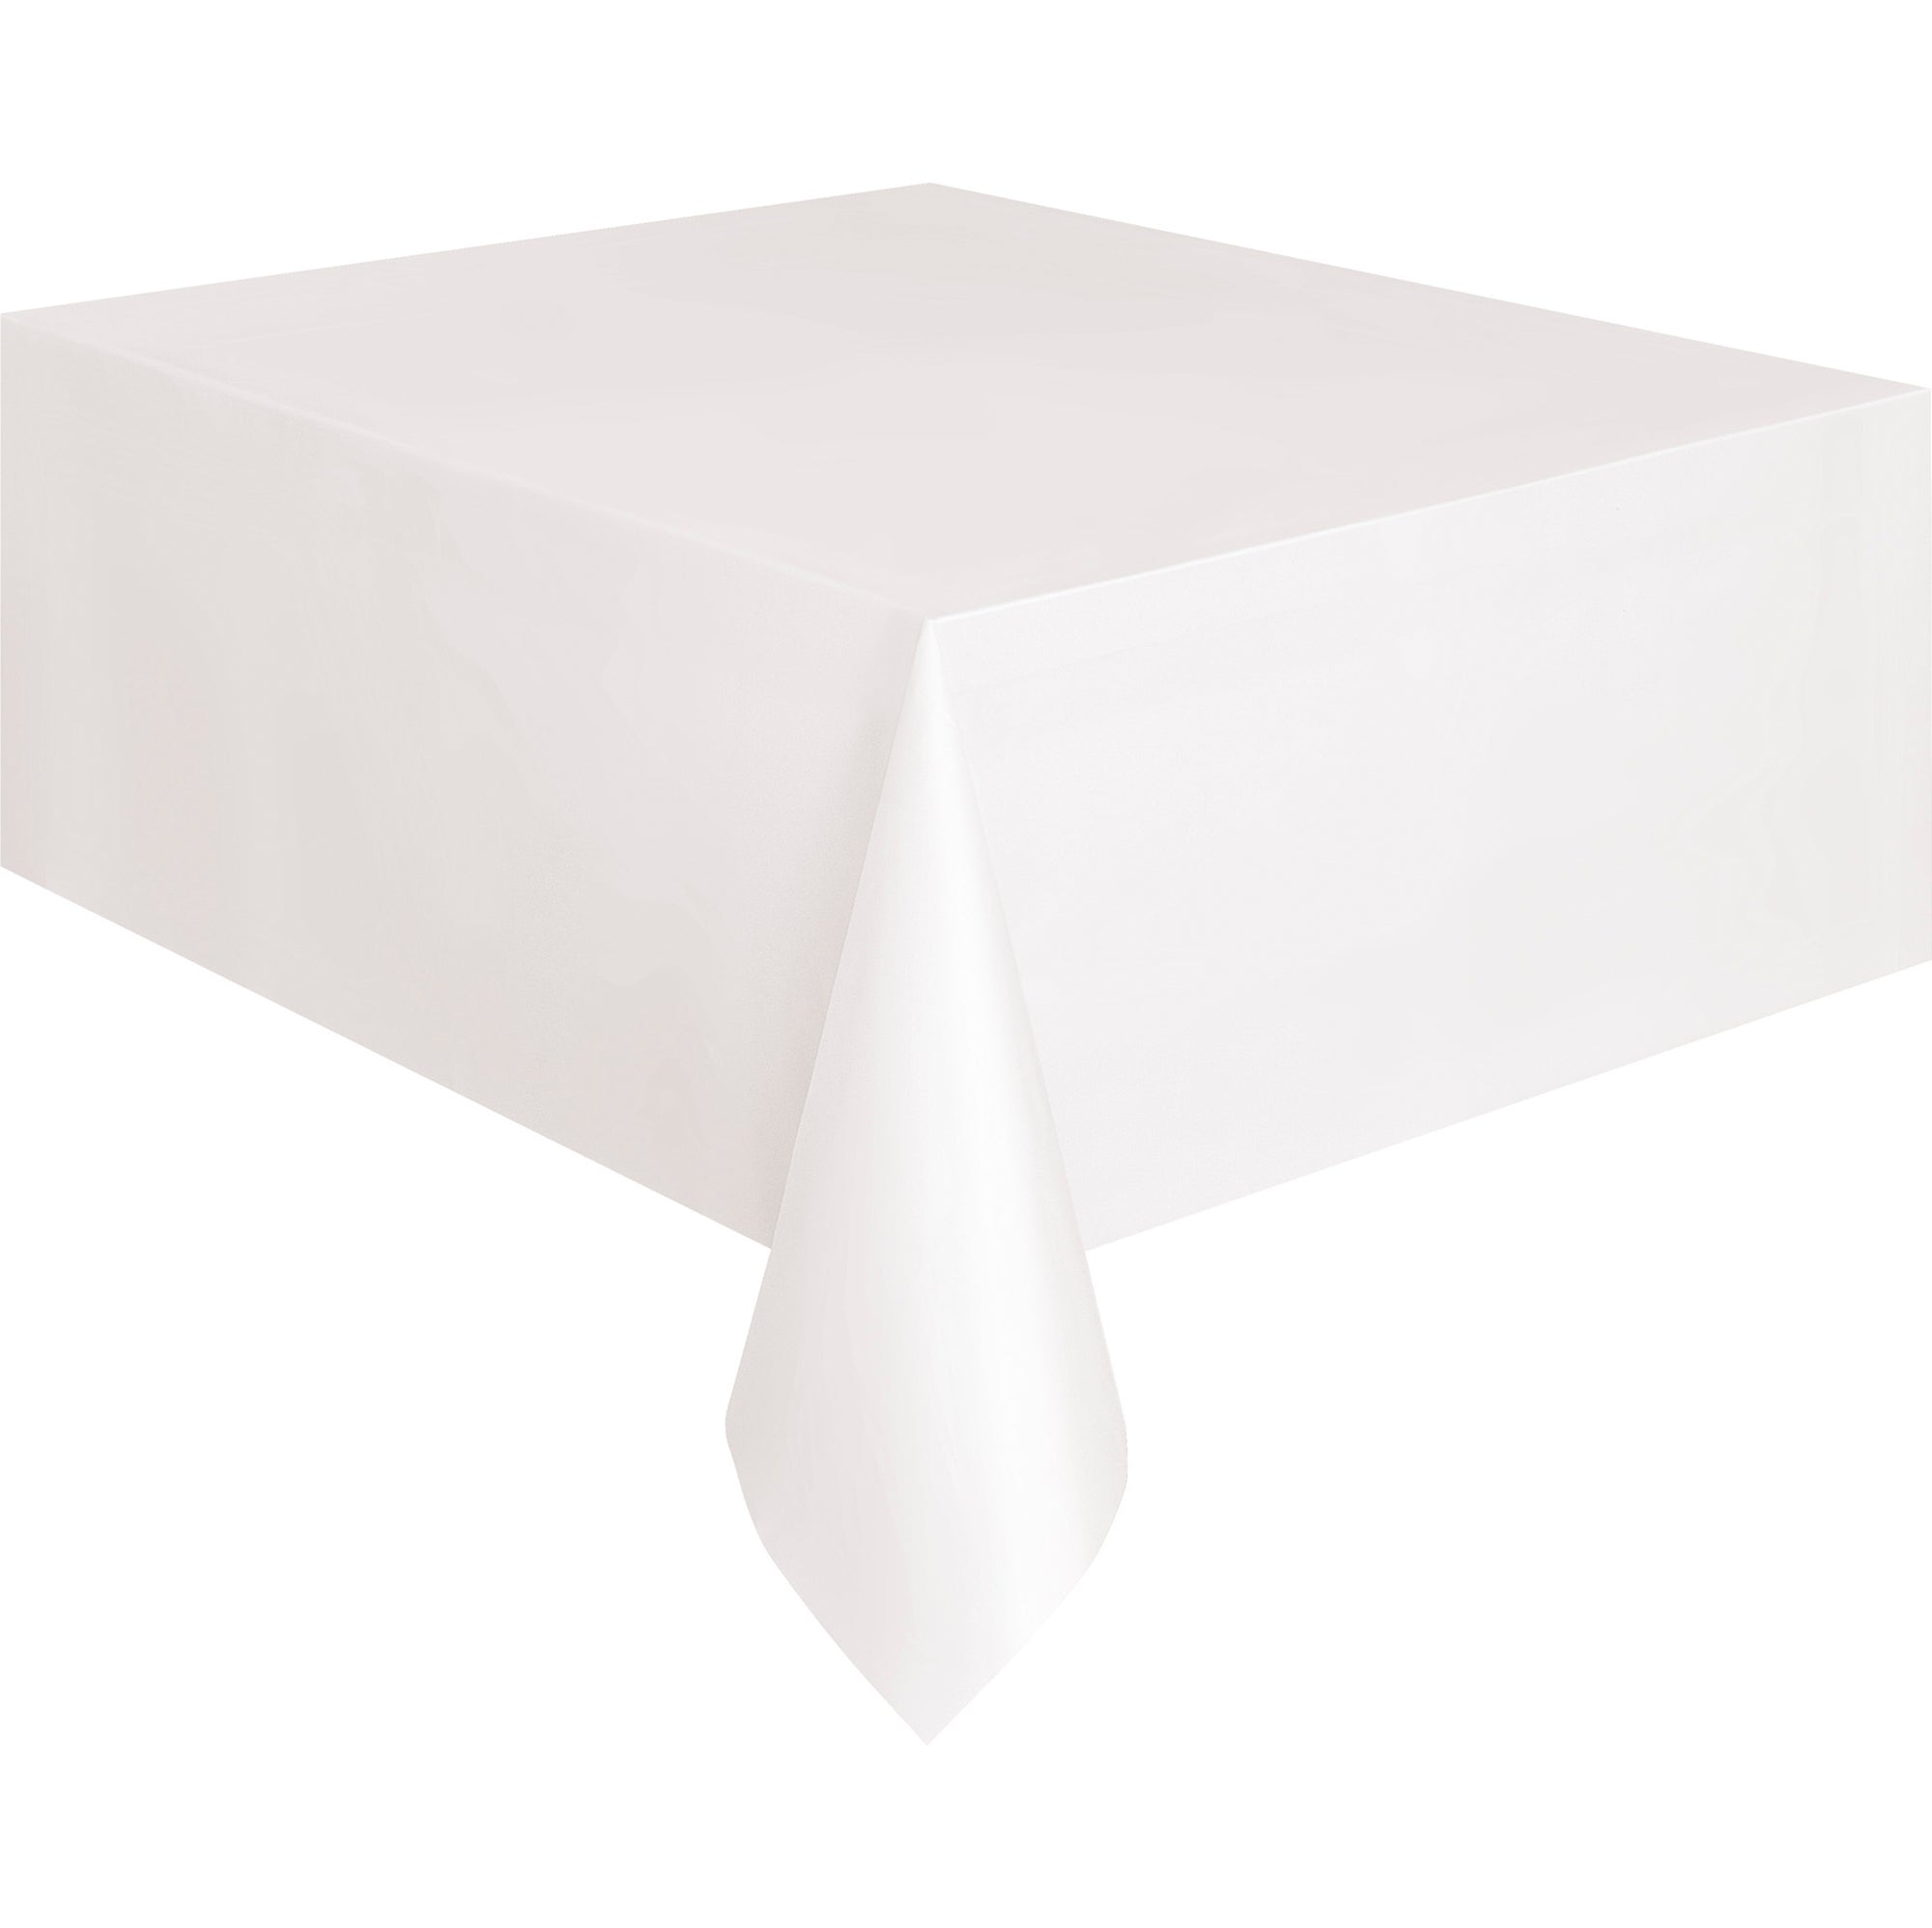 Plastic Table Cover White 54x108in